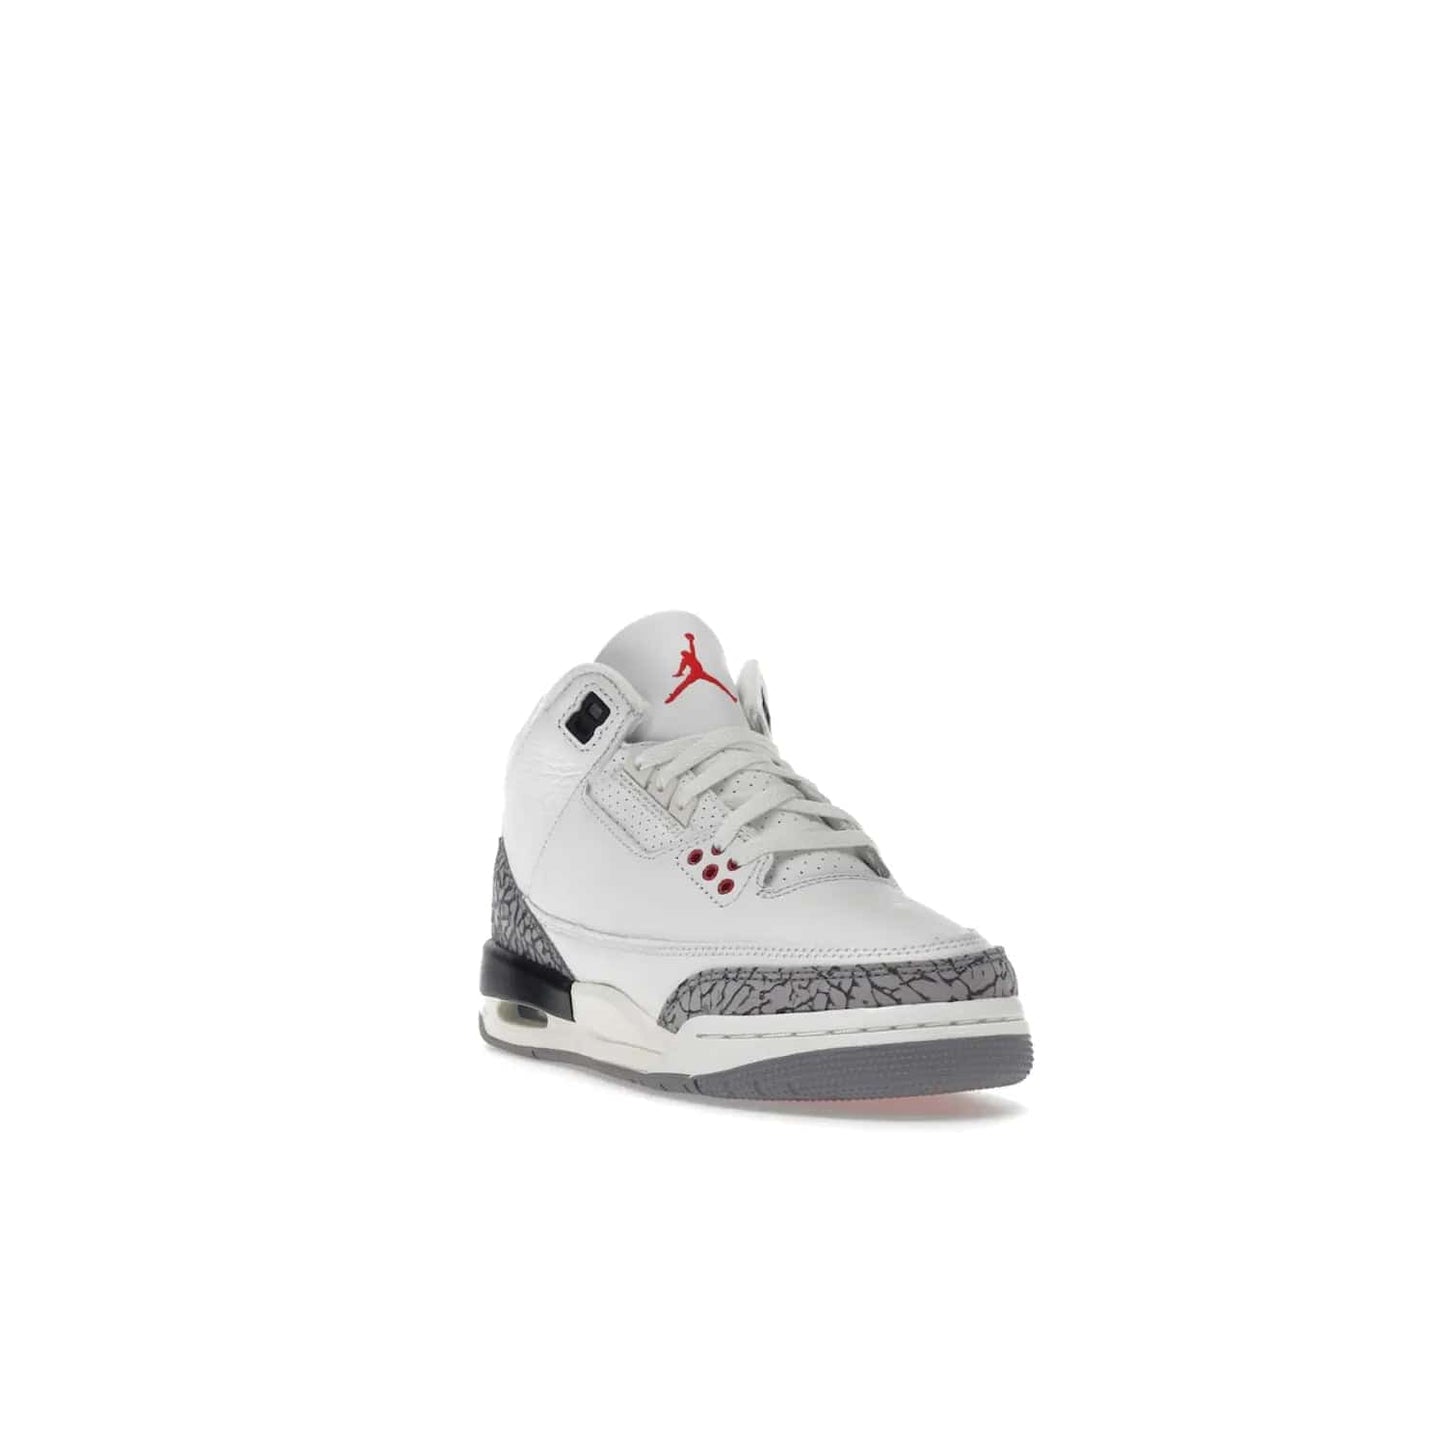 Jordan 3 Retro White Cement Reimagined (GS) - Image 7 - Only at www.BallersClubKickz.com - Grab the perfect blend of modern design and classic style with the Jordan 3 Retro White Cement Reimagined (GS). Features Summit White, Fire Red, Black, and Cement Grey colorway, iconic Jordan logo embroidered on the tongue, and “Nike Air” branding. Limited availability, get your pair before March 11th 2023.